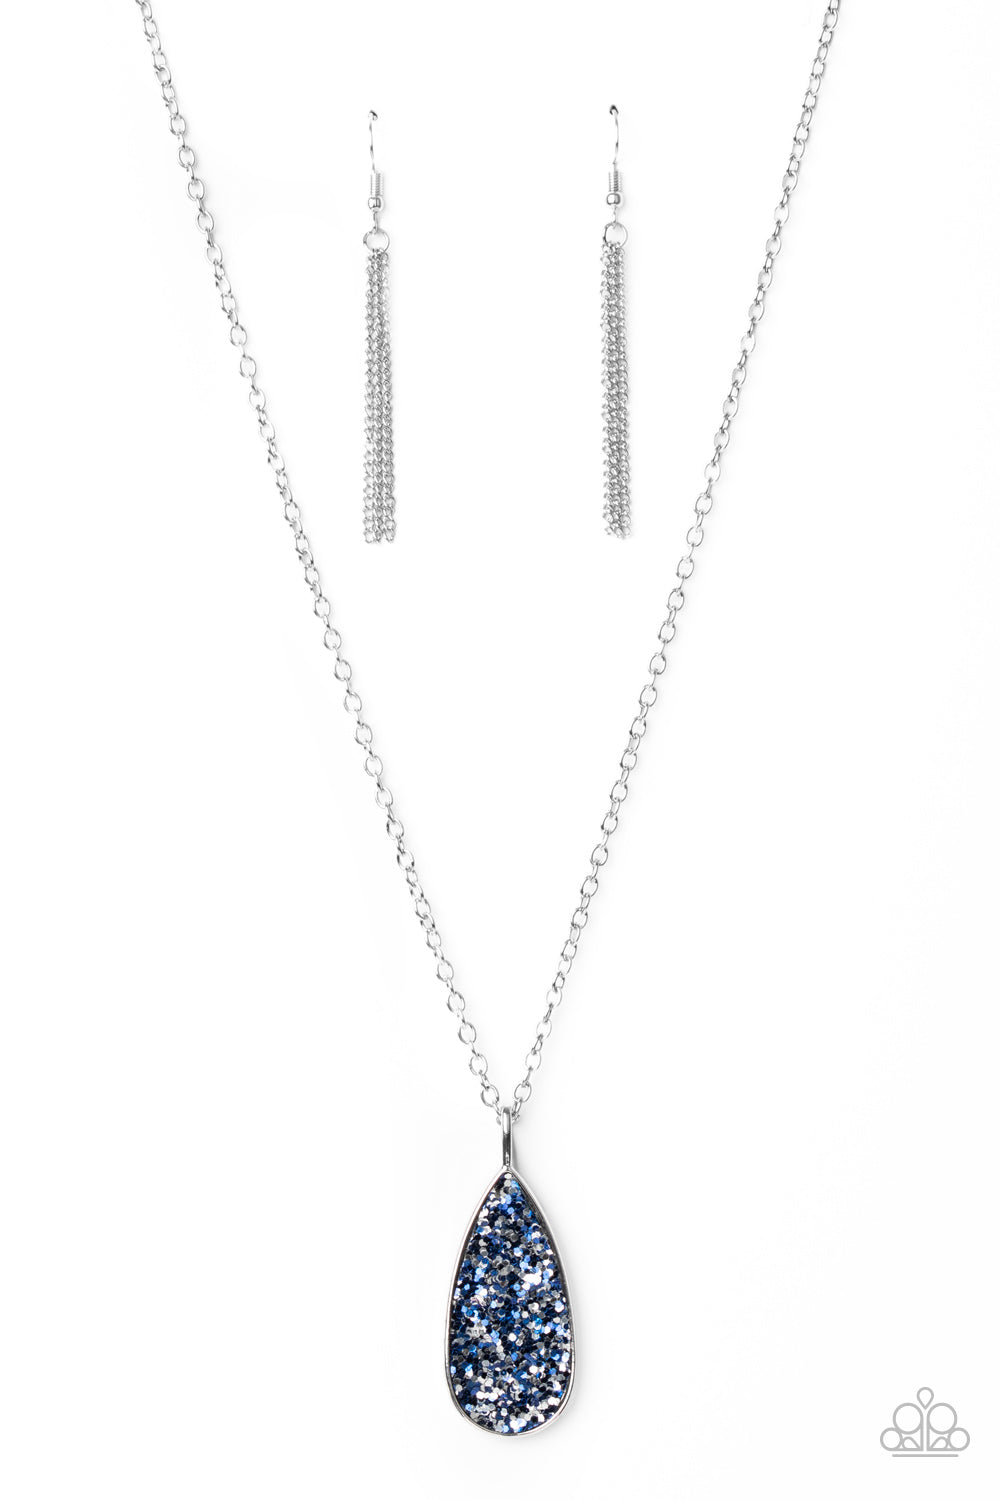 Daily Dose of Sparkle - blue - Paparazzi necklace